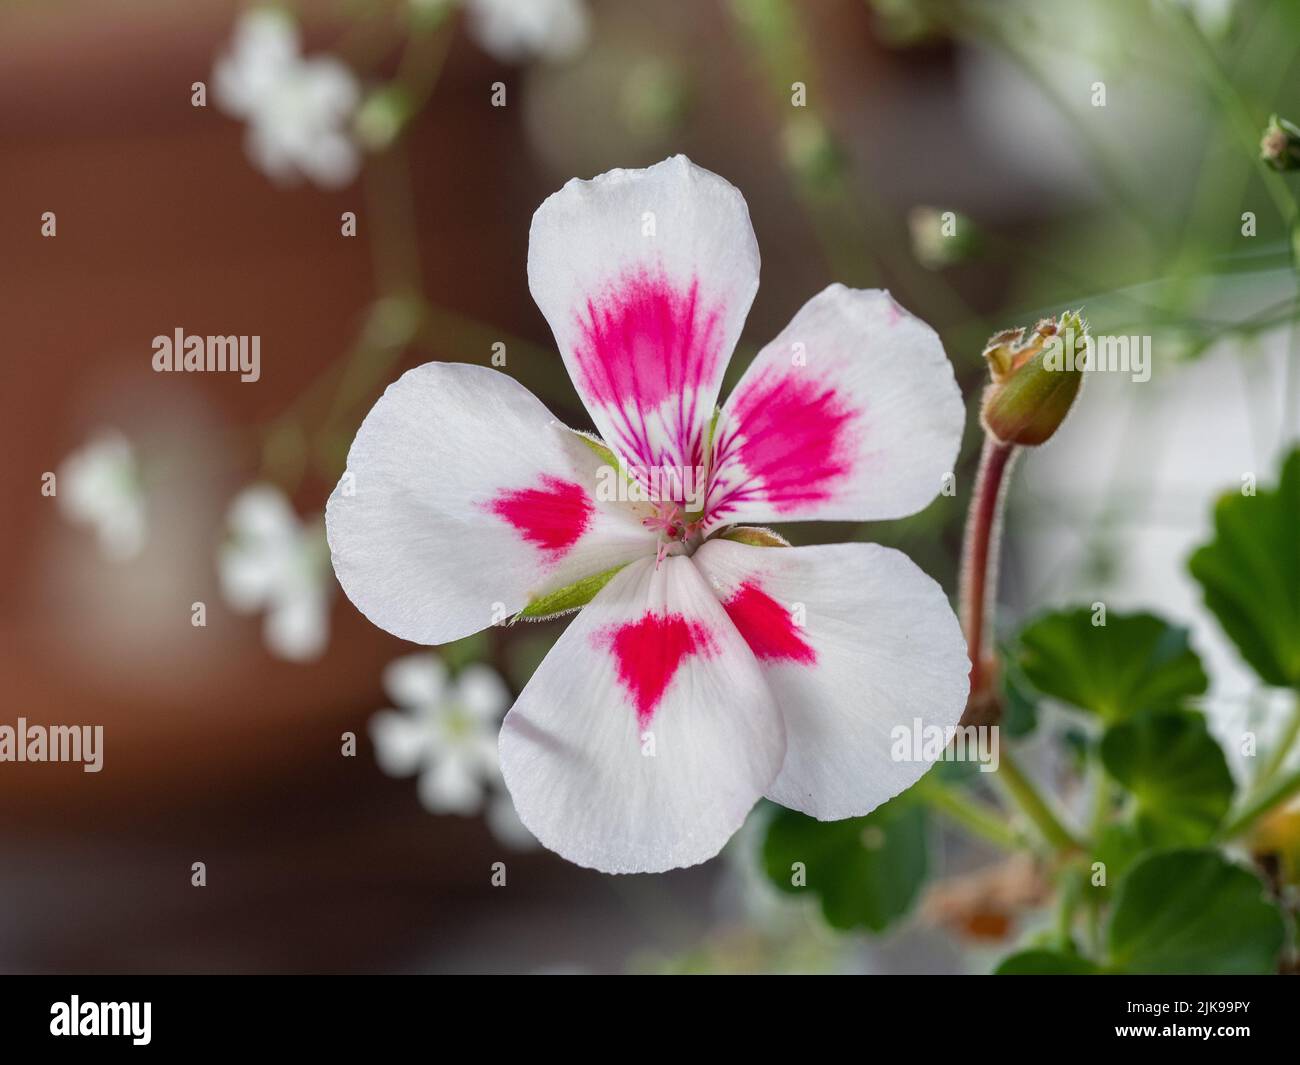 Flowers, pretty Geranium or Pelargonium flower with white petals and hot pink markings, dainty white baby's breath flowers behind, Australian garden Stock Photo